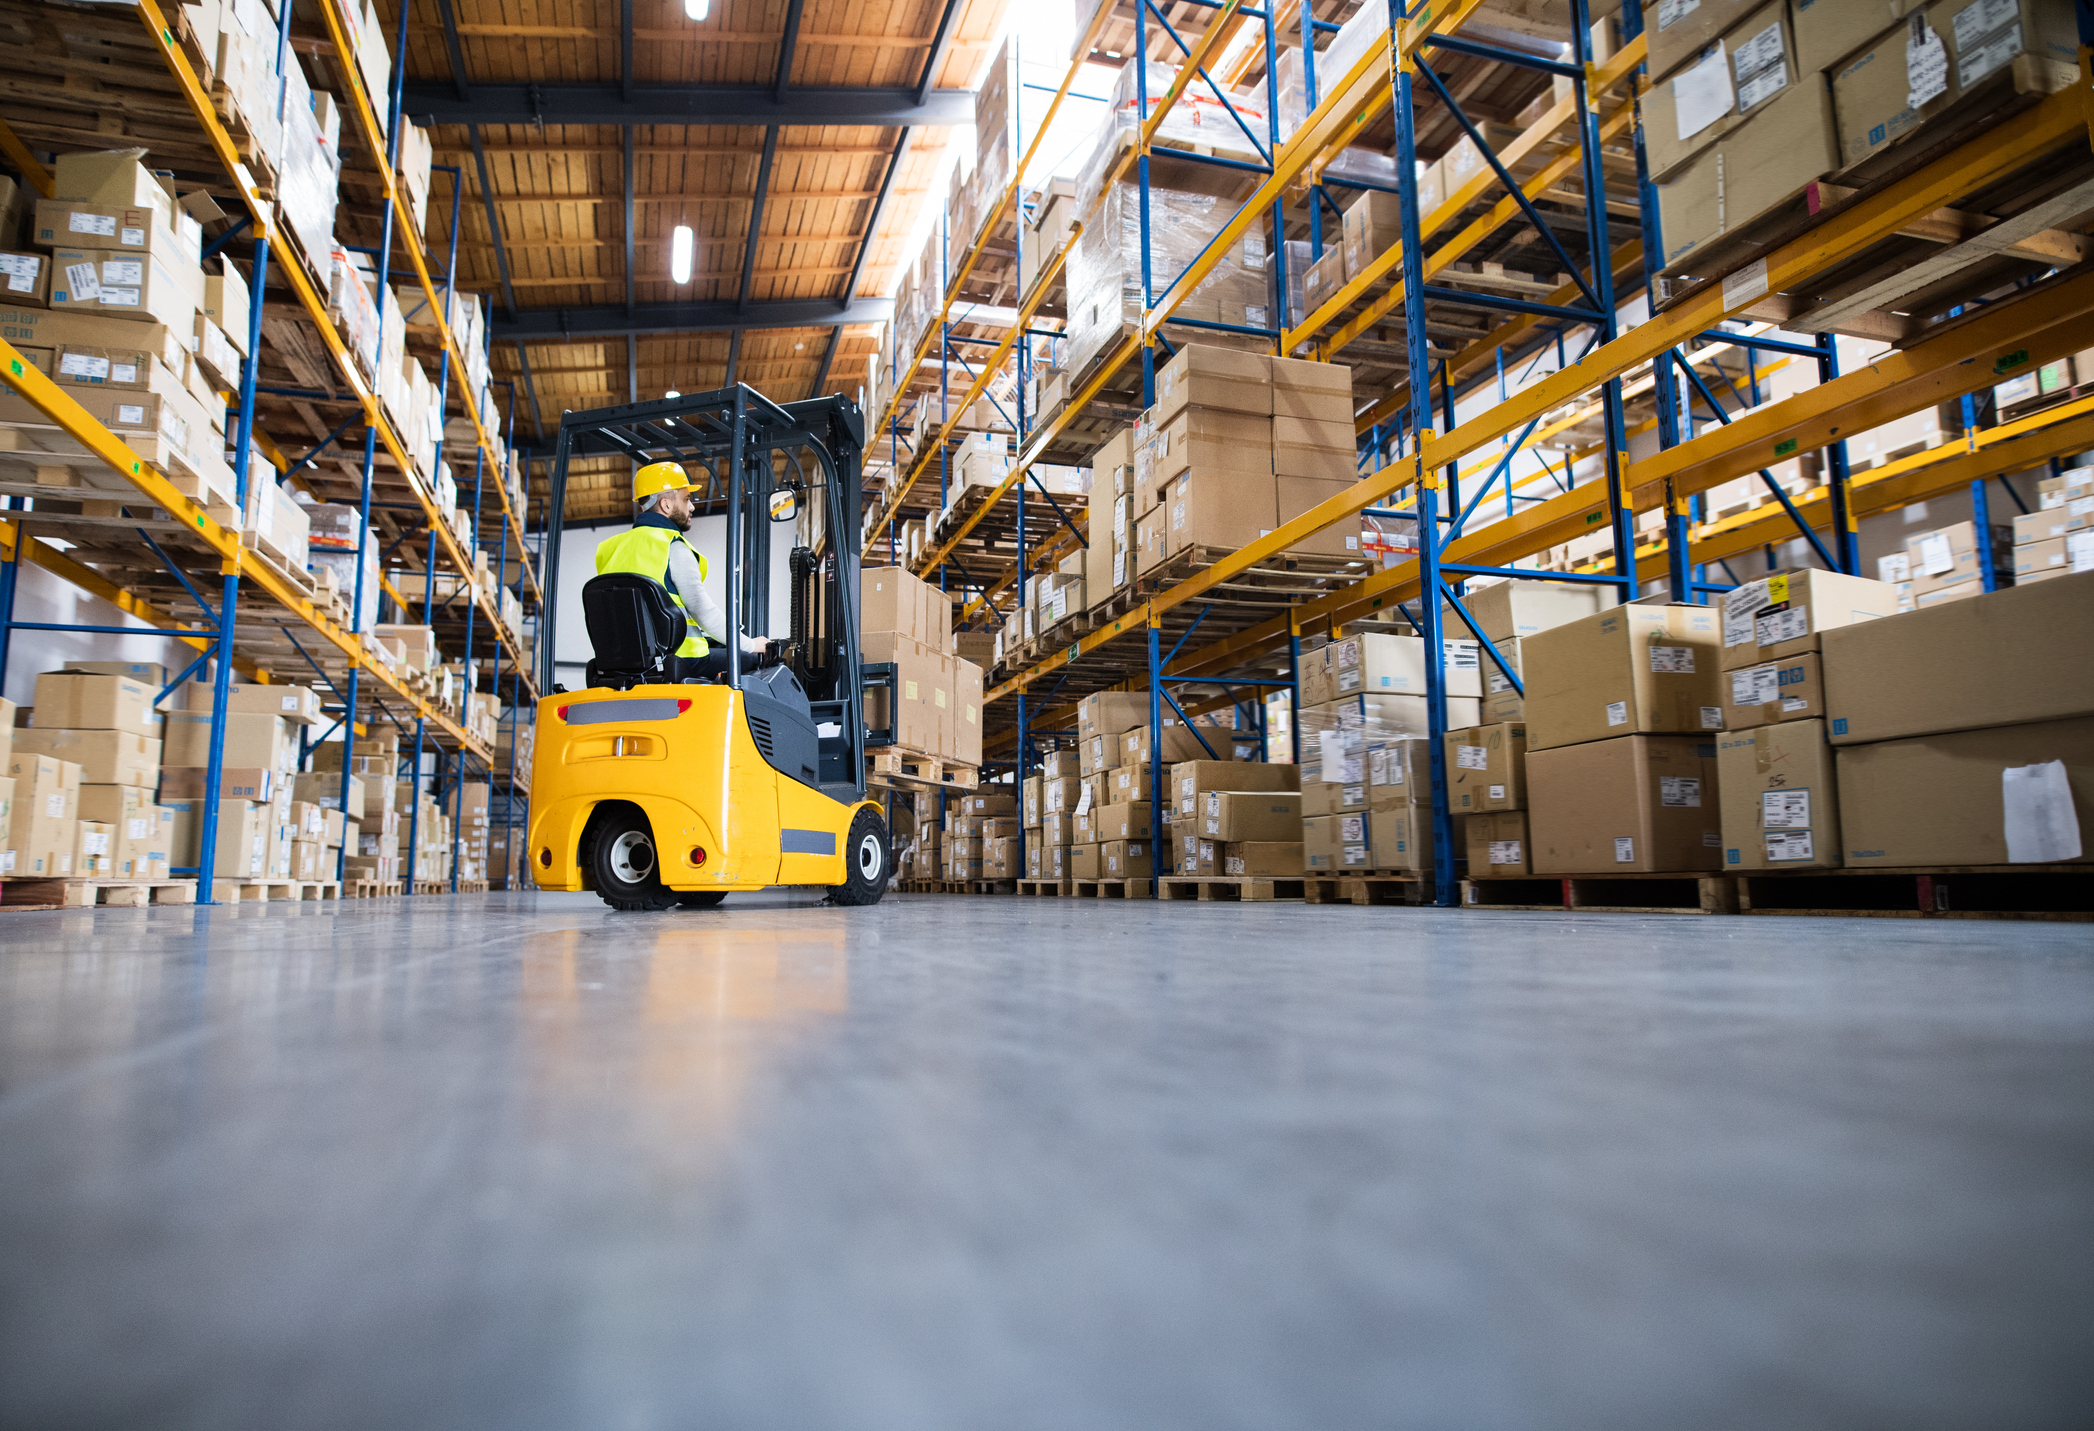 Warehouse Forklift - Supply Chain Management (SCM) - Waller & Associates - Supply Chain Consulting